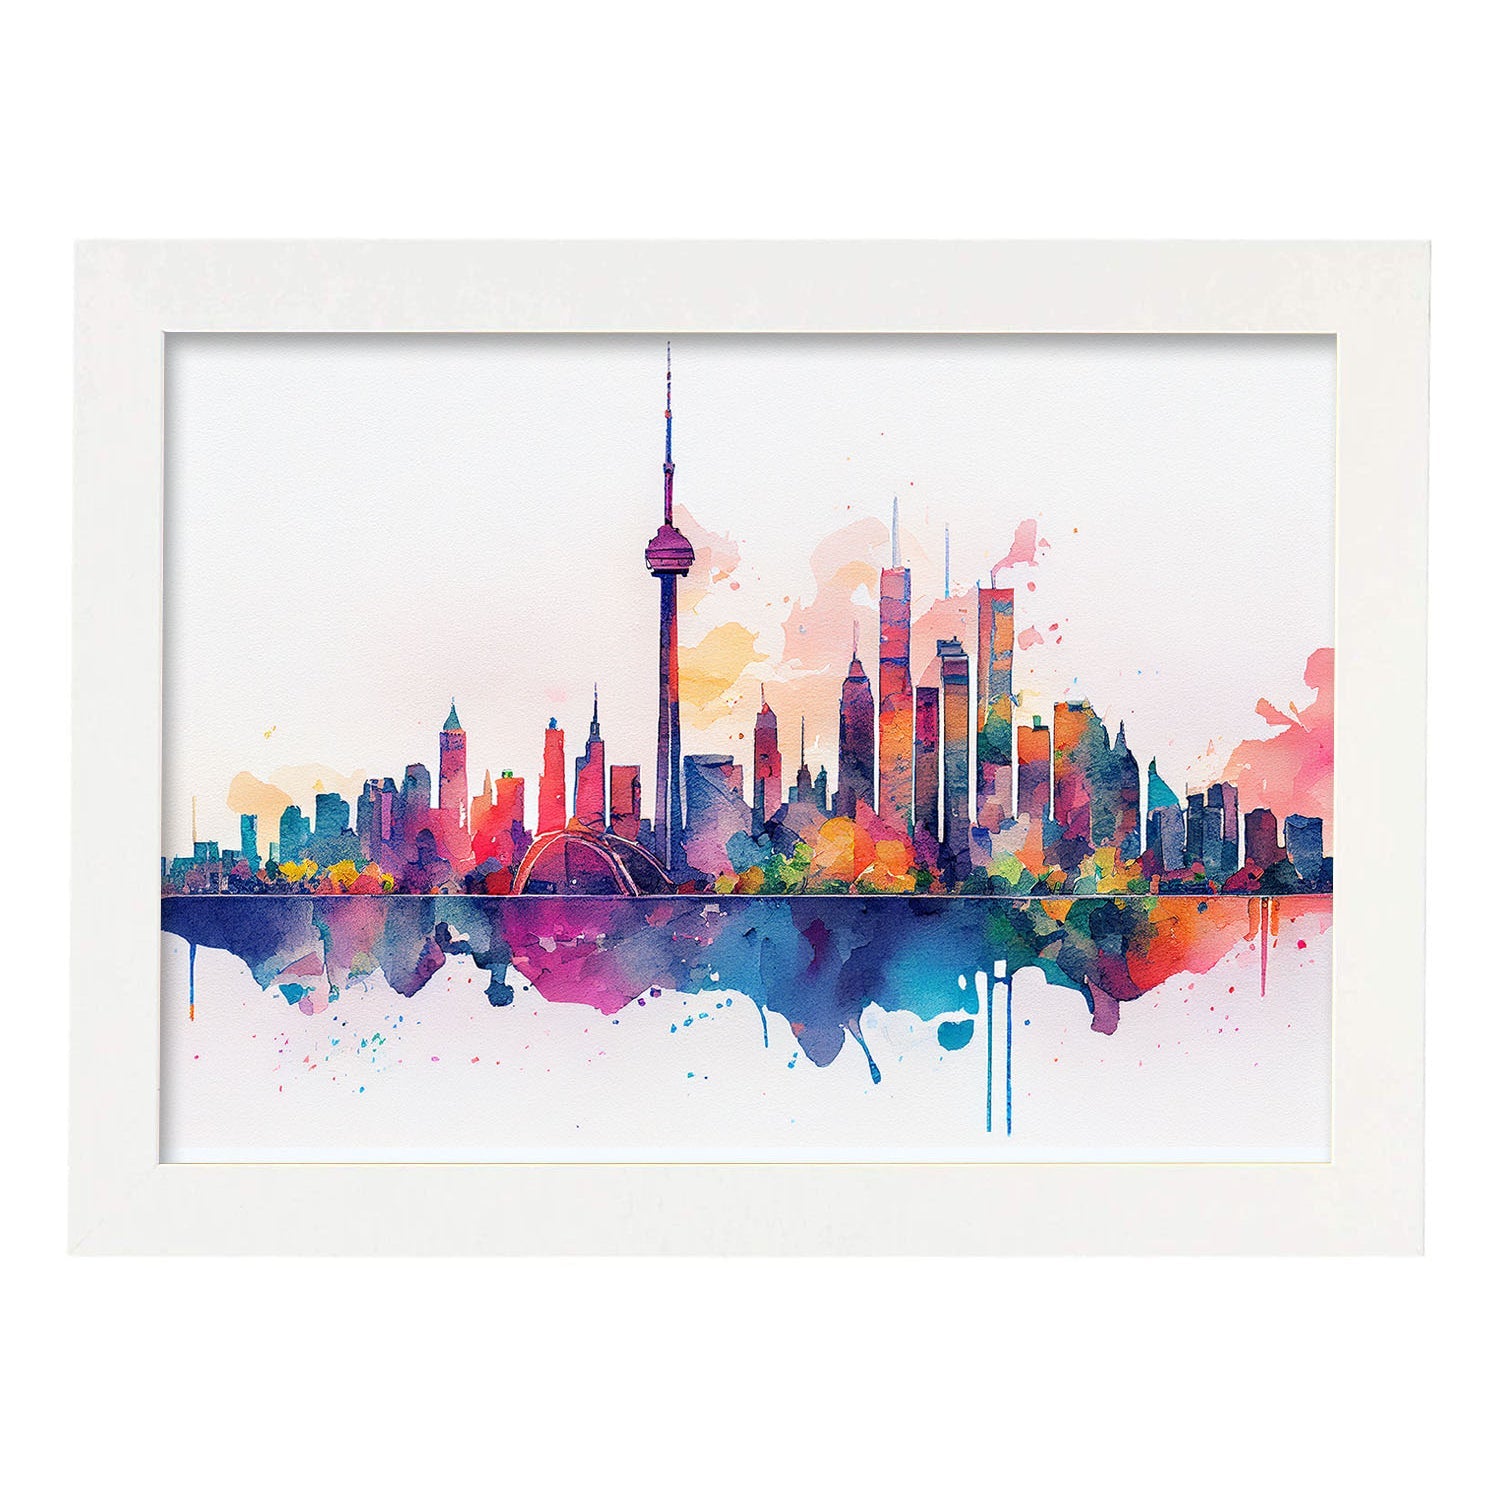 Nacnic watercolor of a skyline of the city of Toronto_1. Aesthetic Wall Art Prints for Bedroom or Living Room Design.-Artwork-Nacnic-A4-Marco Blanco-Nacnic Estudio SL